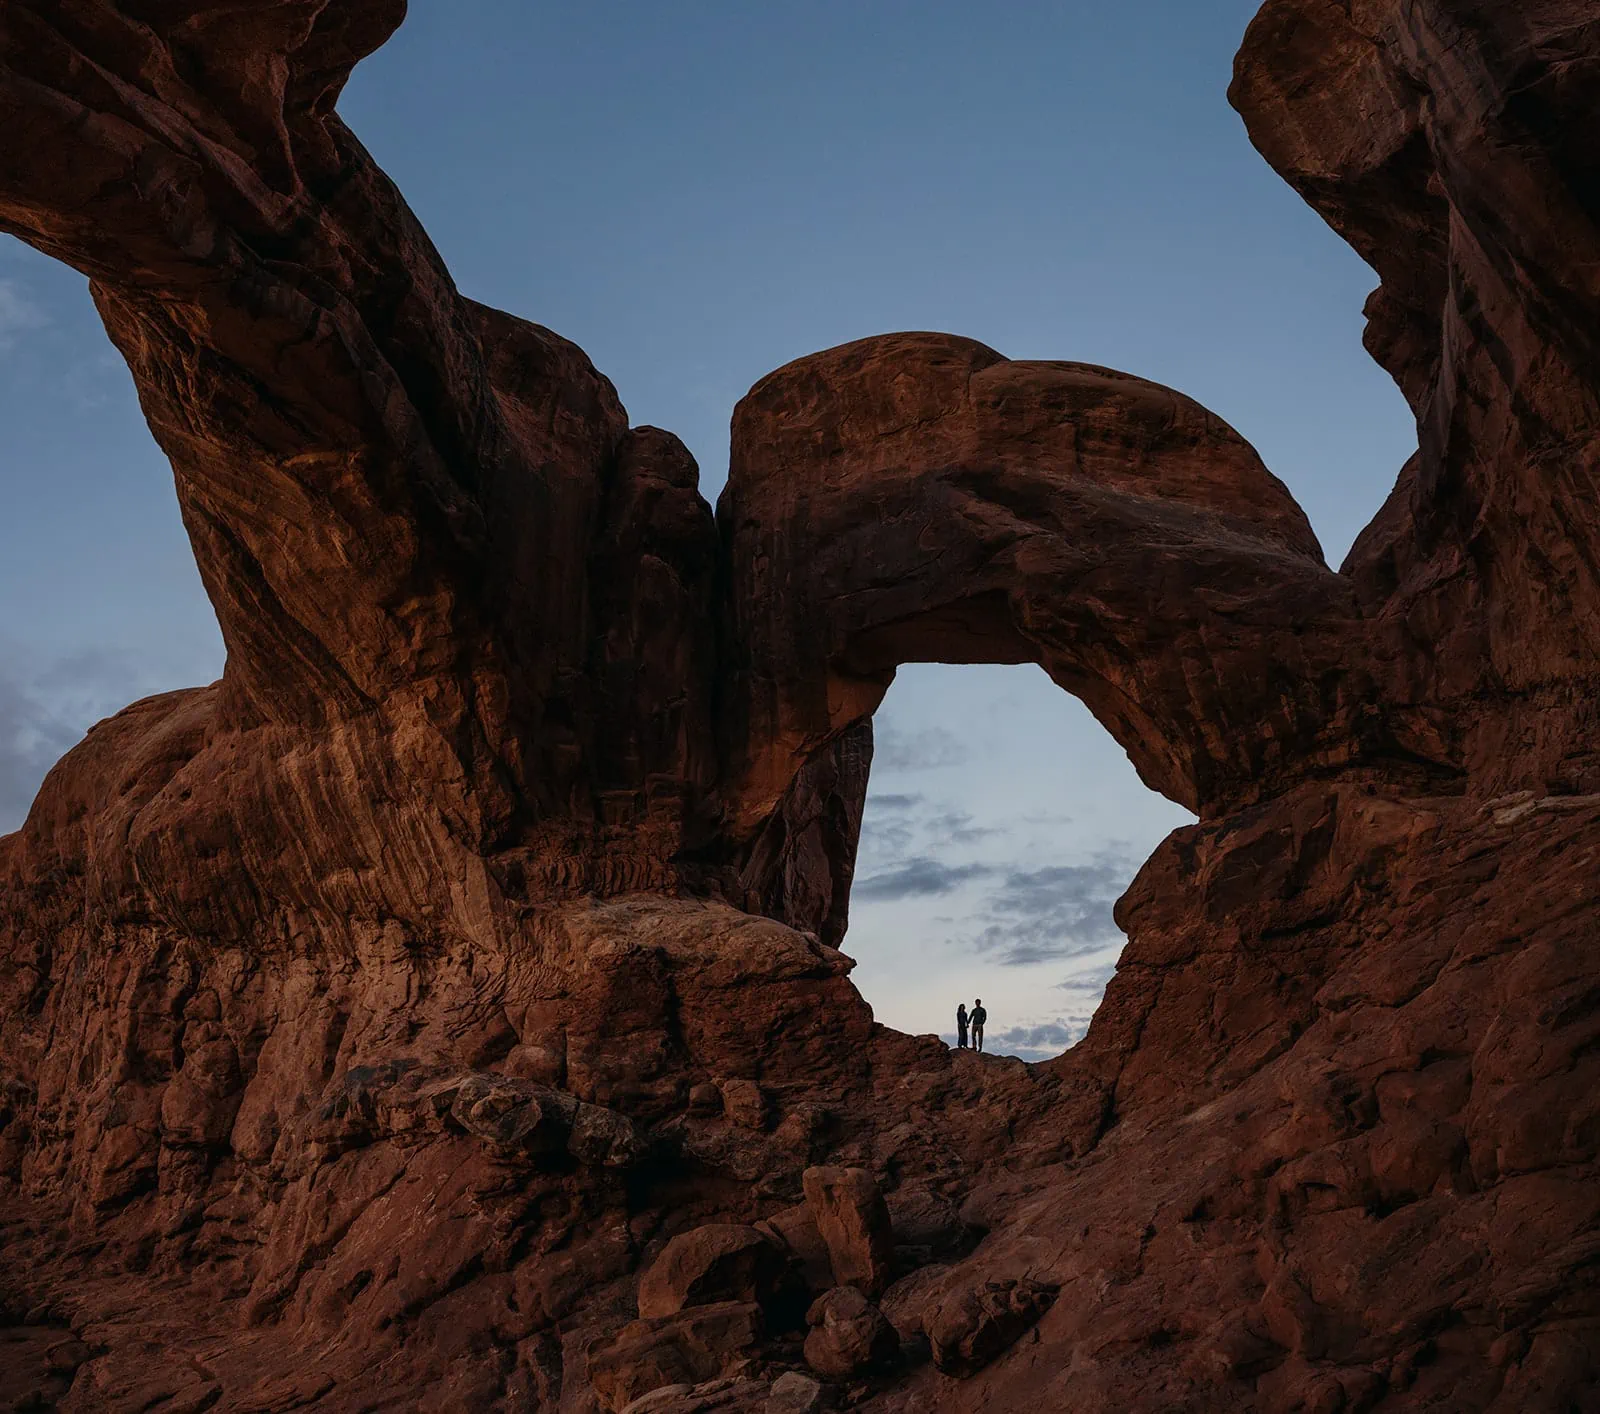 A man and woman stand together within an arch at sunrise